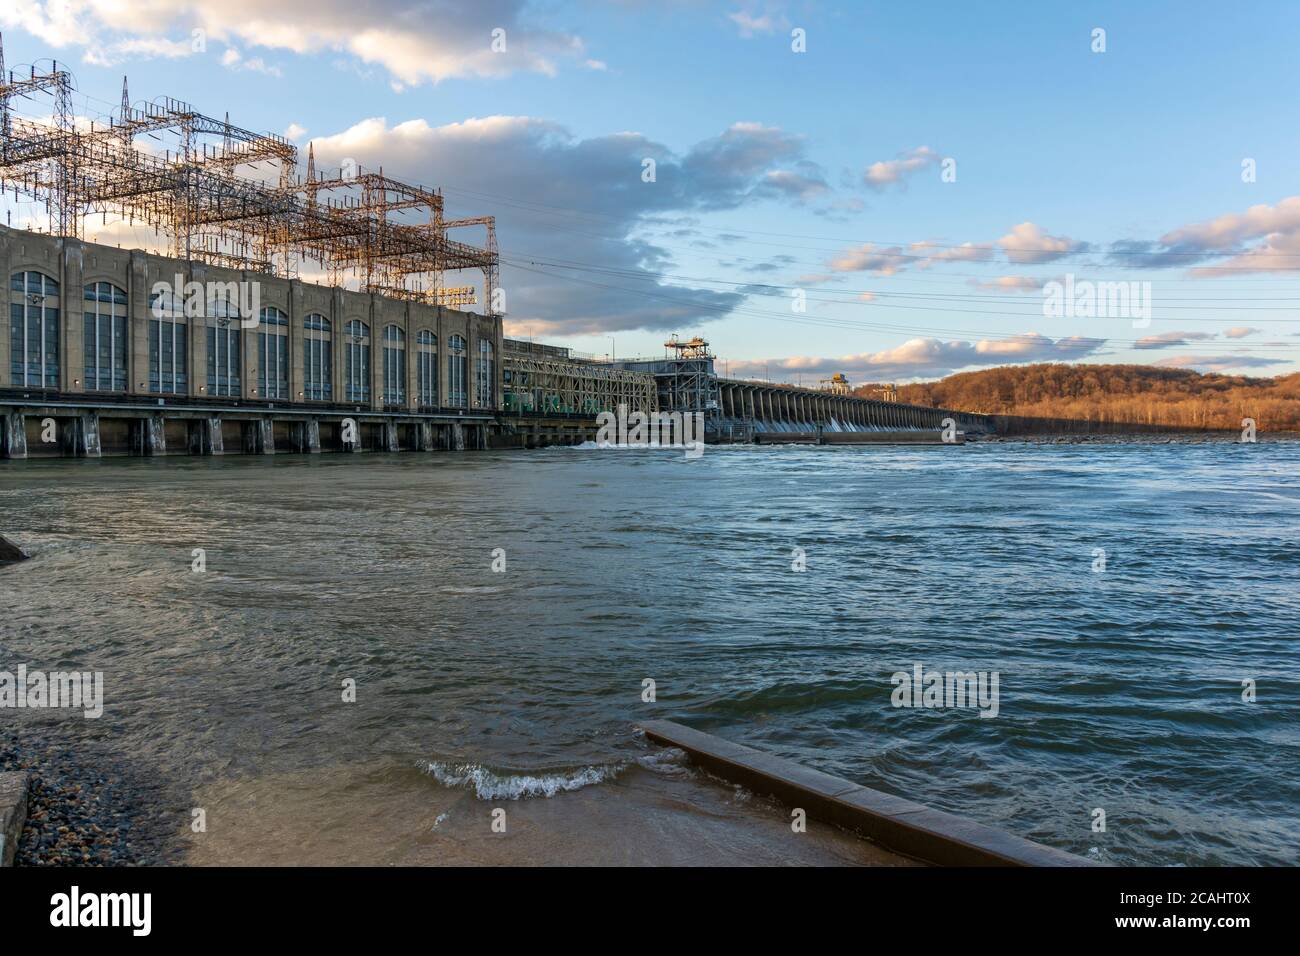 The sun is setting over the Conowingo Dam, which crosses the Susquehanna River in northeastern Maryland, United States. Stock Photo